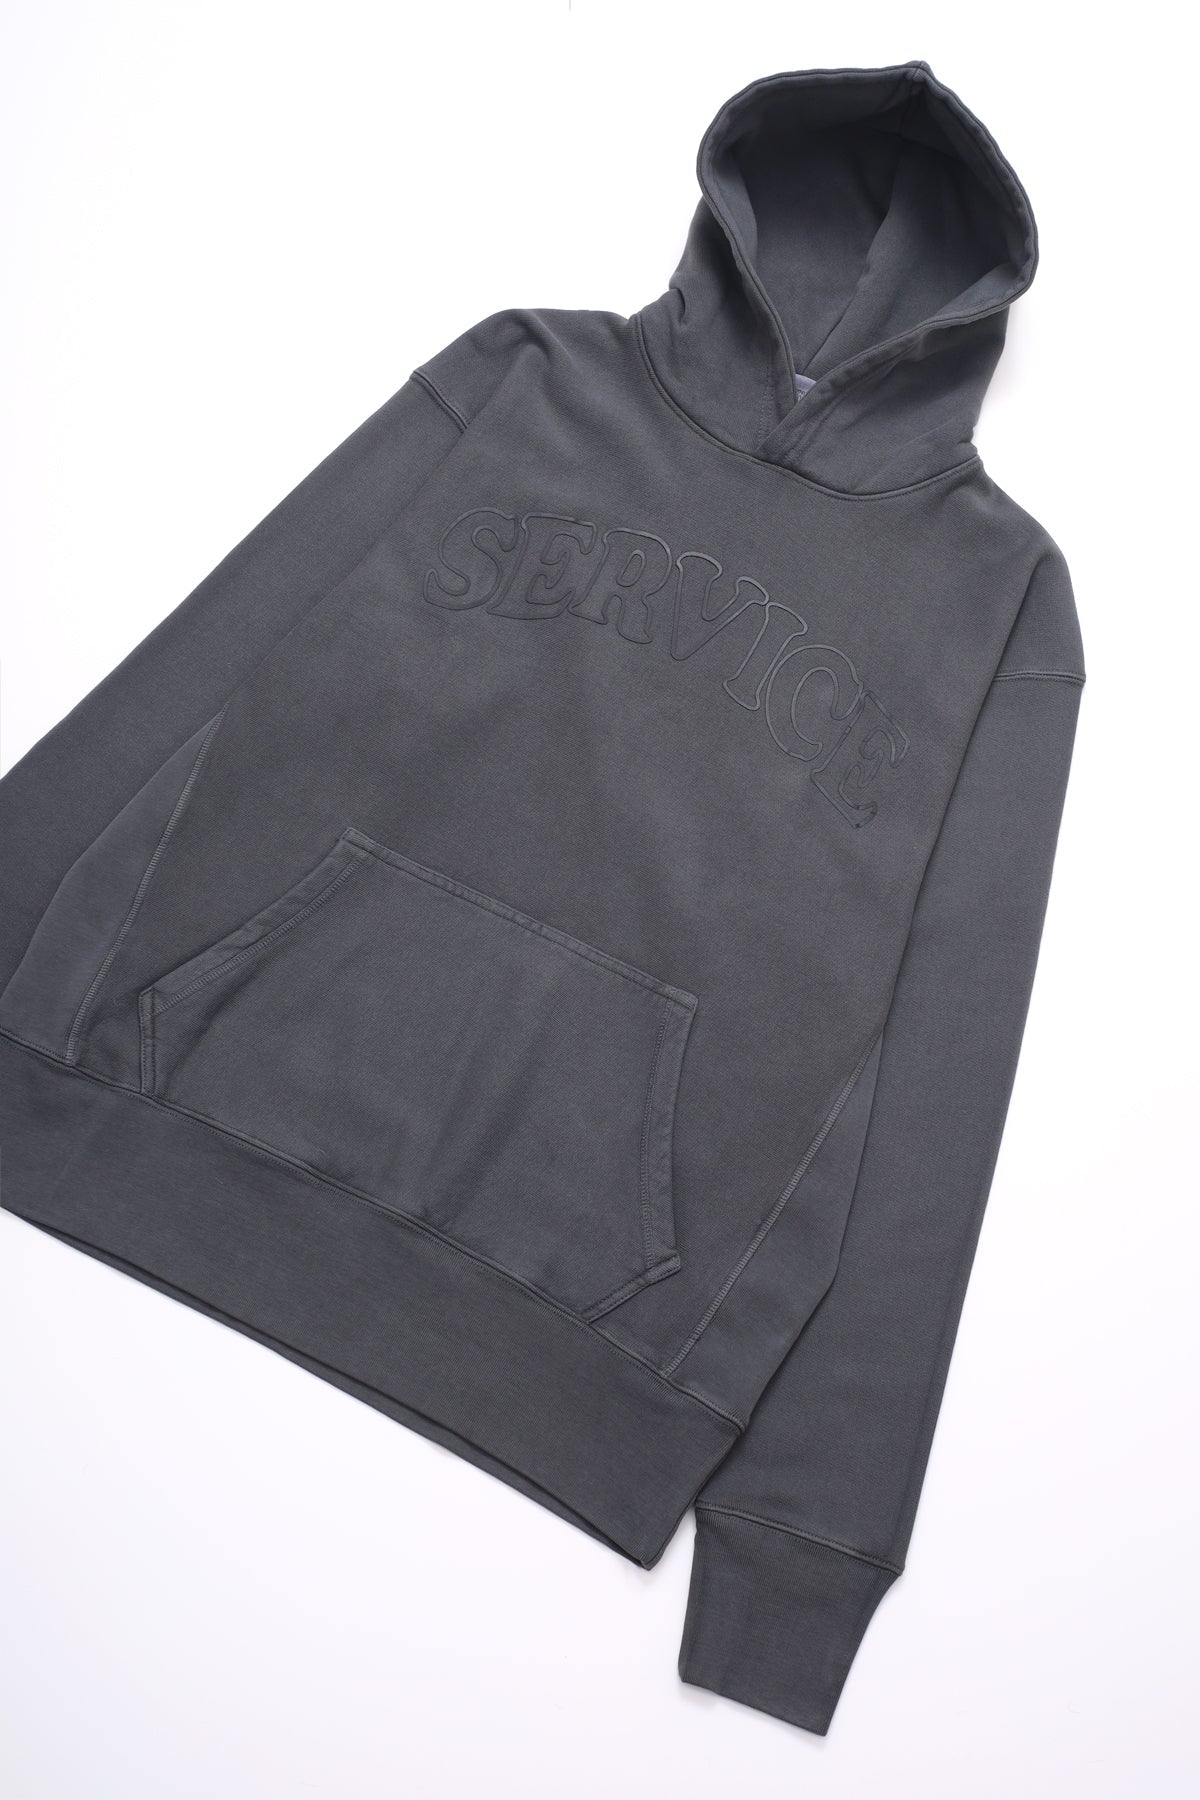 Service Works Arch Logo Hoodie - Charcoal